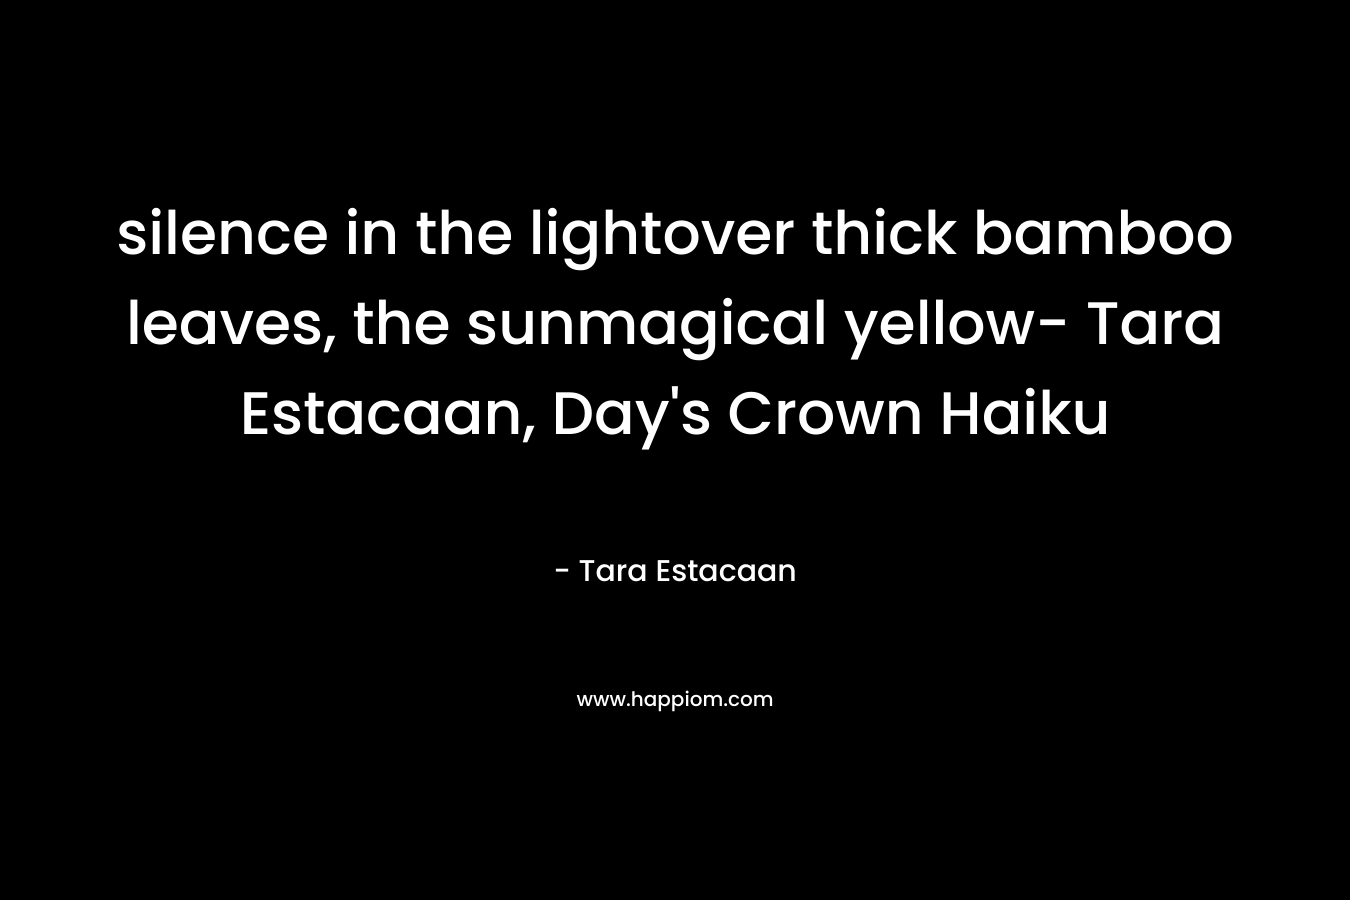 silence in the lightover thick bamboo leaves, the sunmagical yellow- Tara Estacaan, Day's Crown Haiku